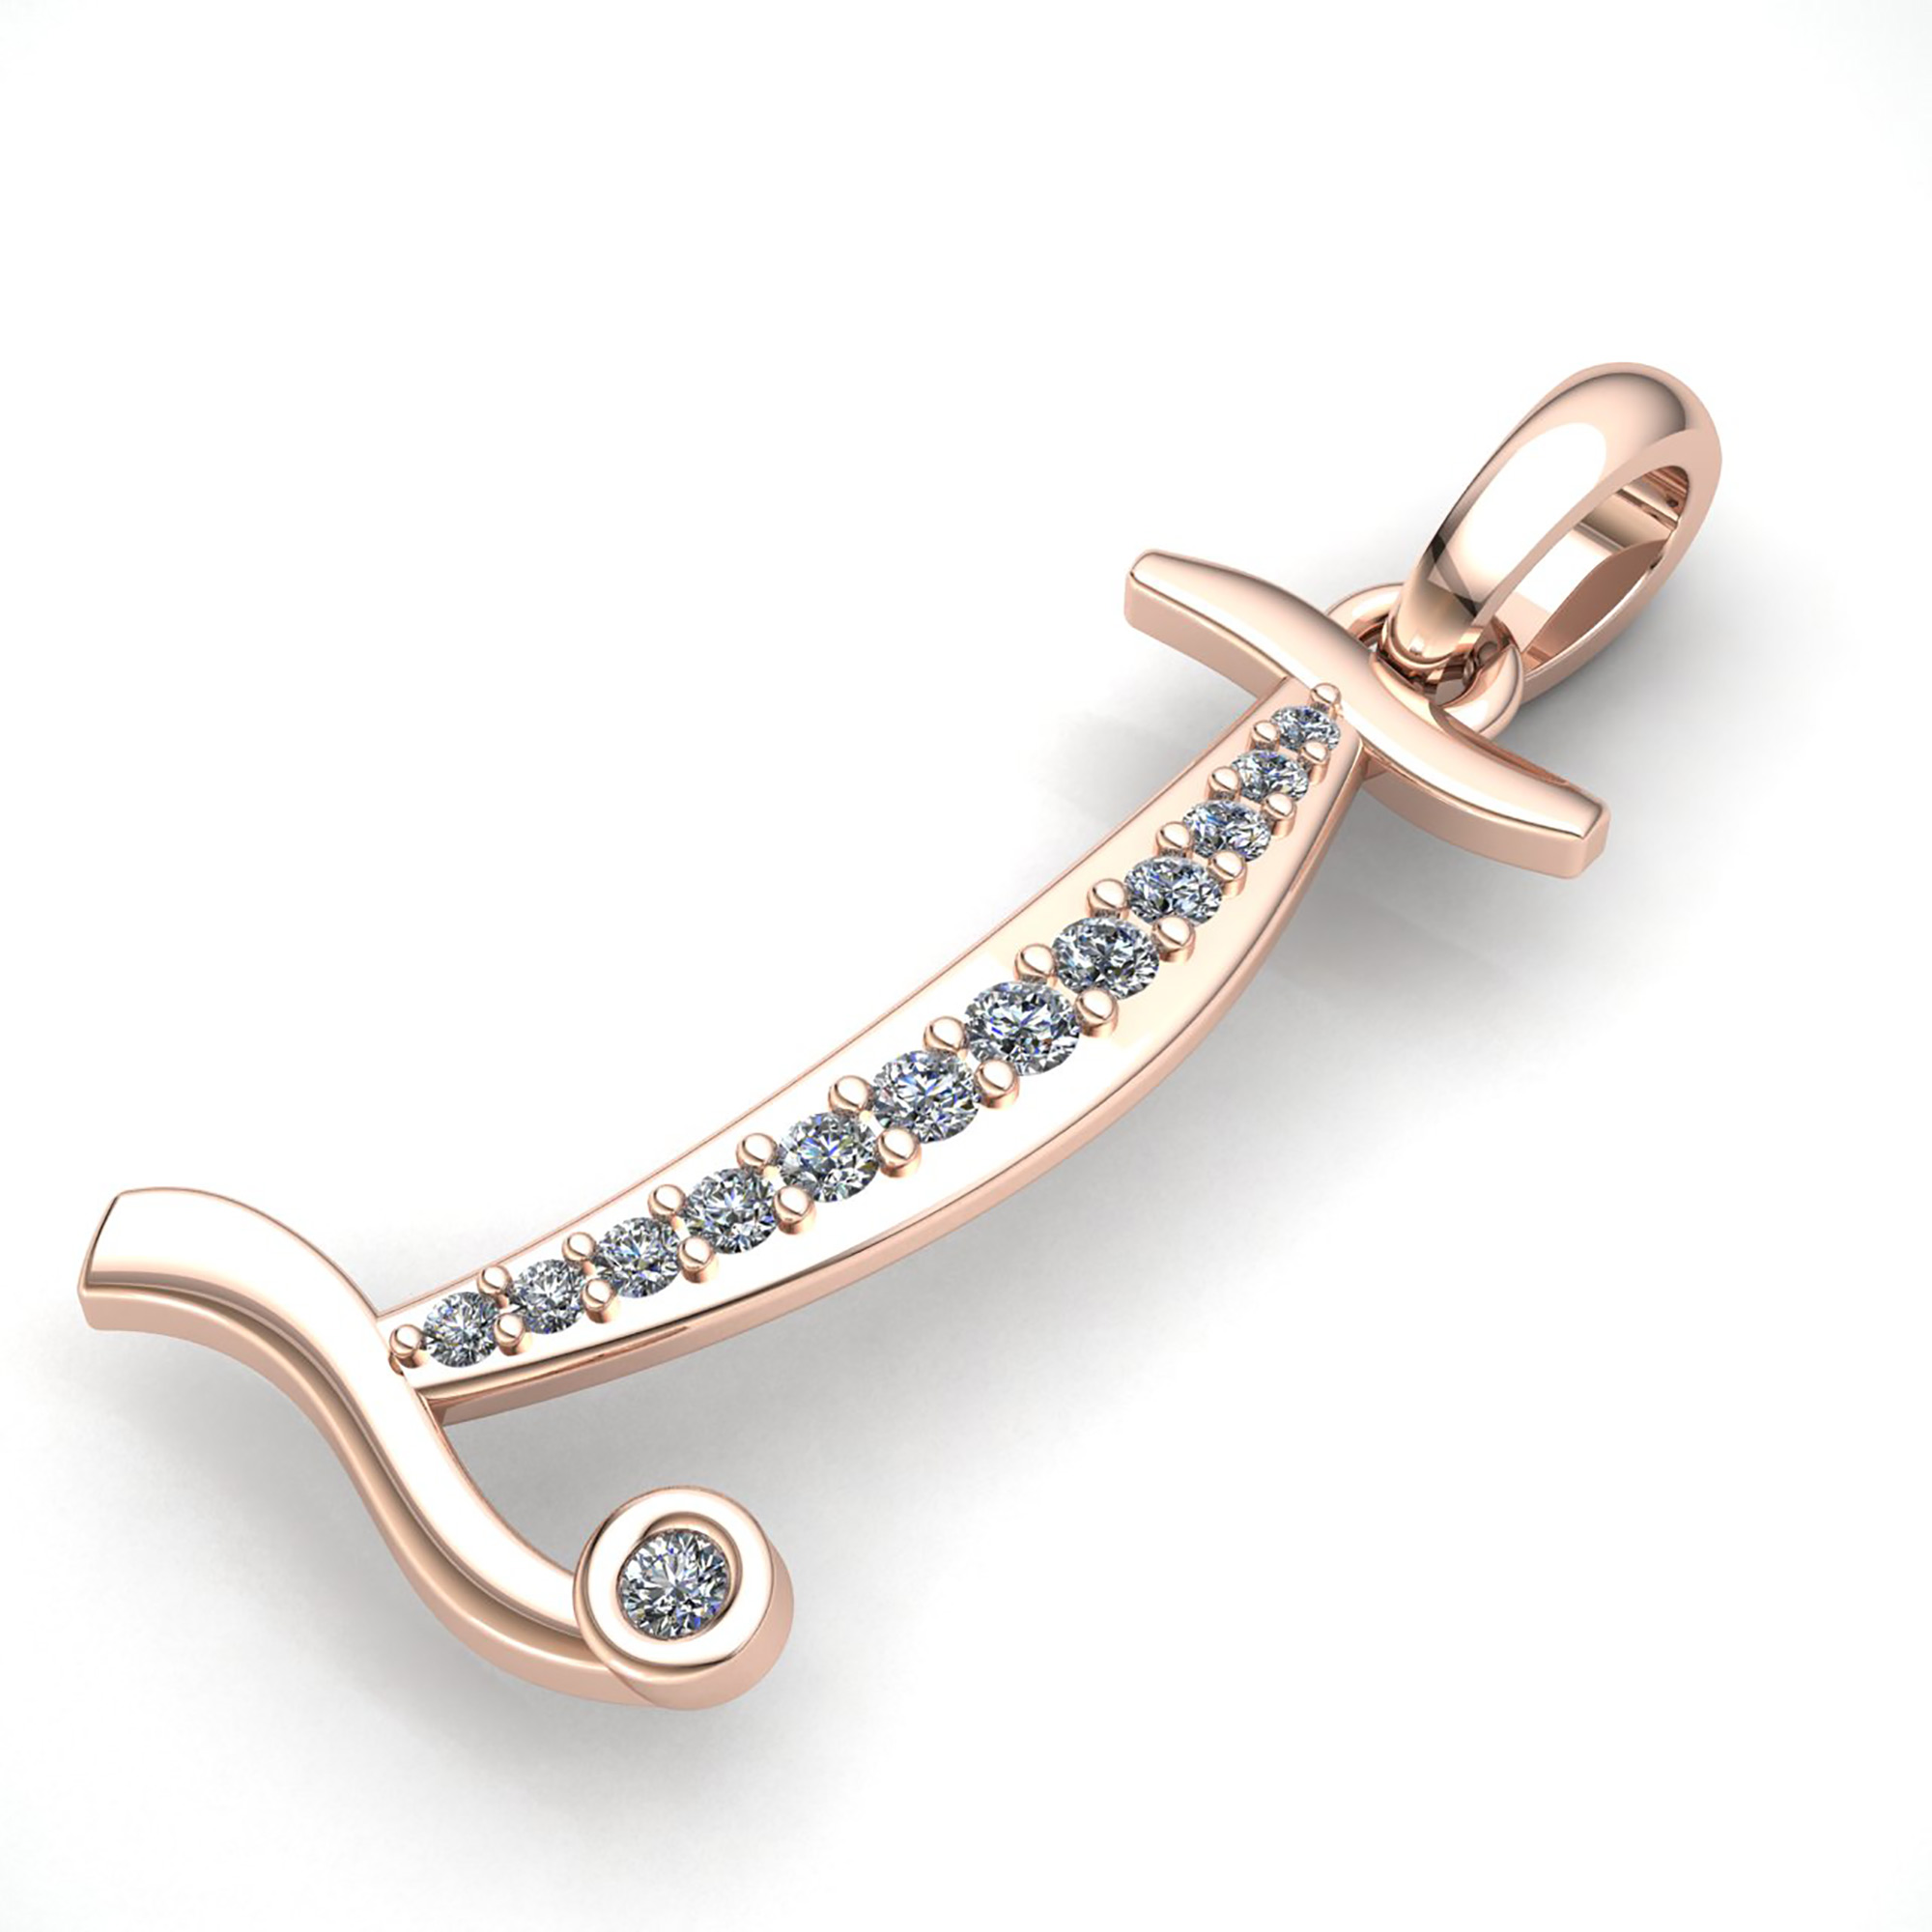 Jewel We Sell Real 1carat Round Cut Diamond Ladies Initial Letter Alphabet 'I' Pendant Solid 18K Rose Gold H SI2